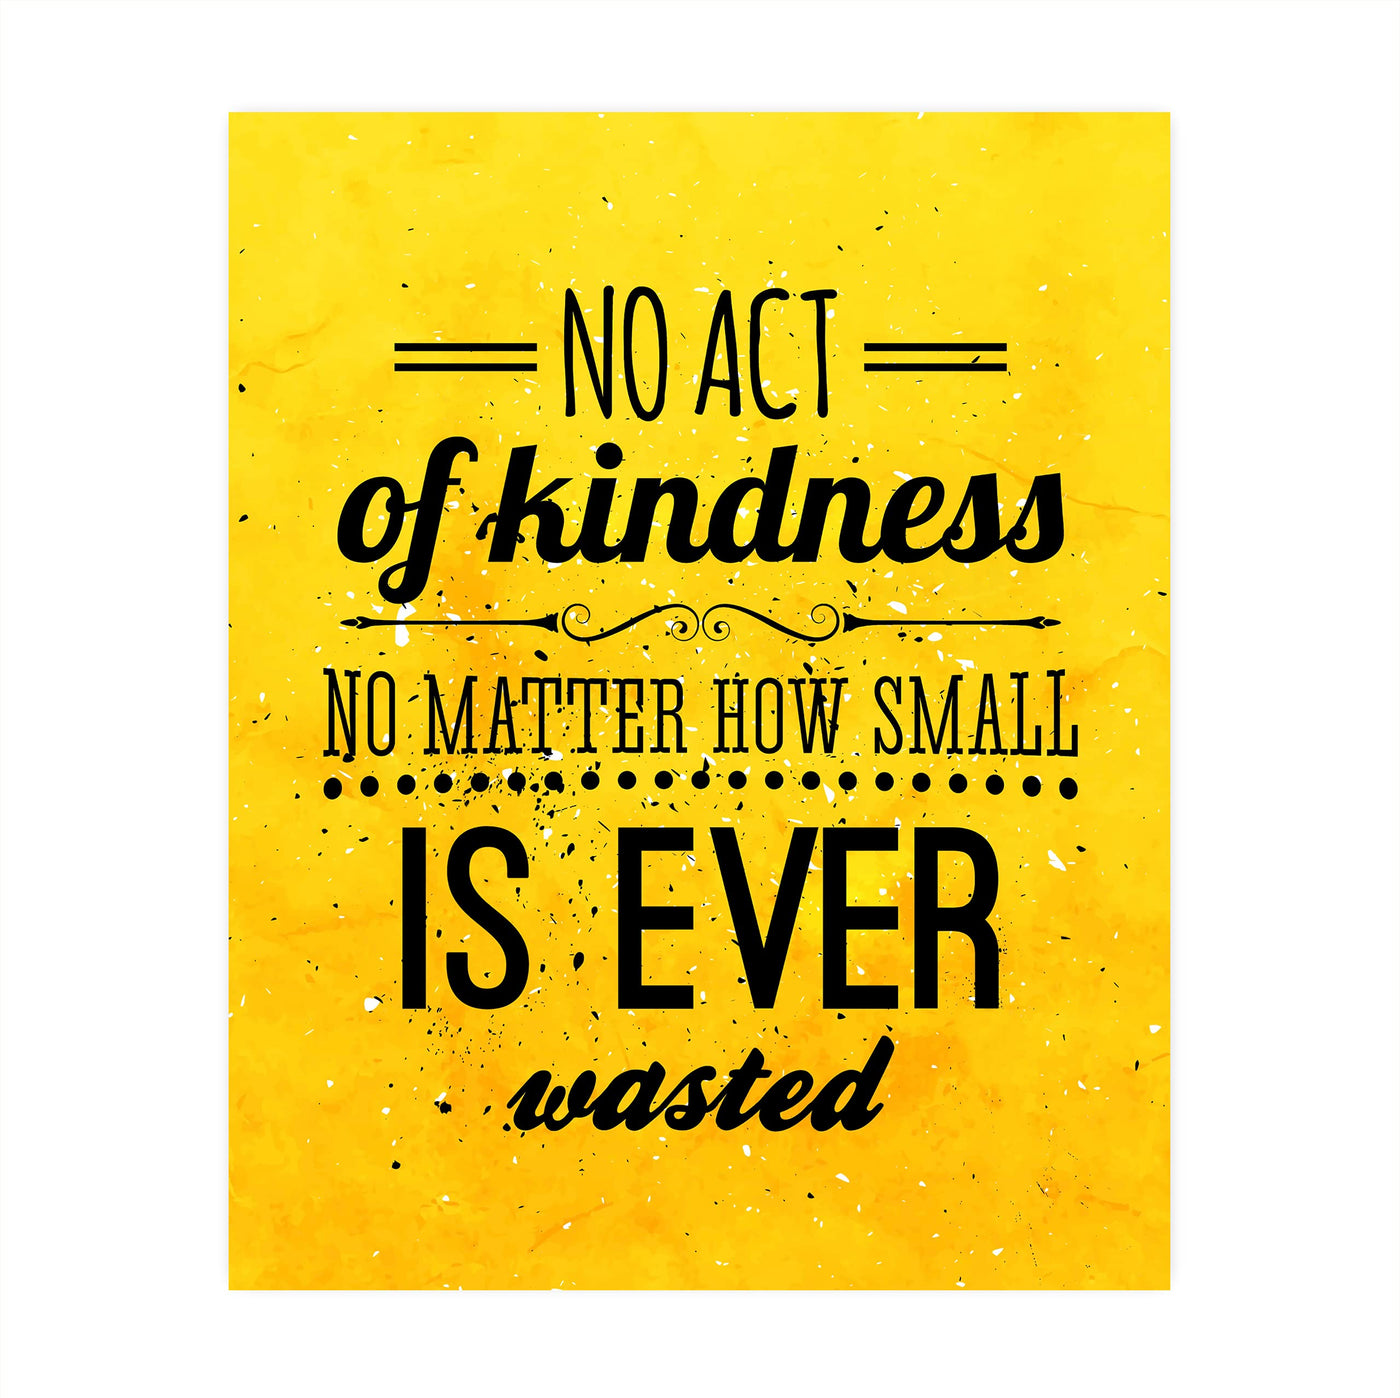 No Act of Kindness Is Ever Wasted-Inspirational Quotes Wall Art-8 x 10" Positive Classroom Wall Print-Ready to Frame. Modern Typographic Home-Office-School-Work Decor. Great Motivational Gift!!